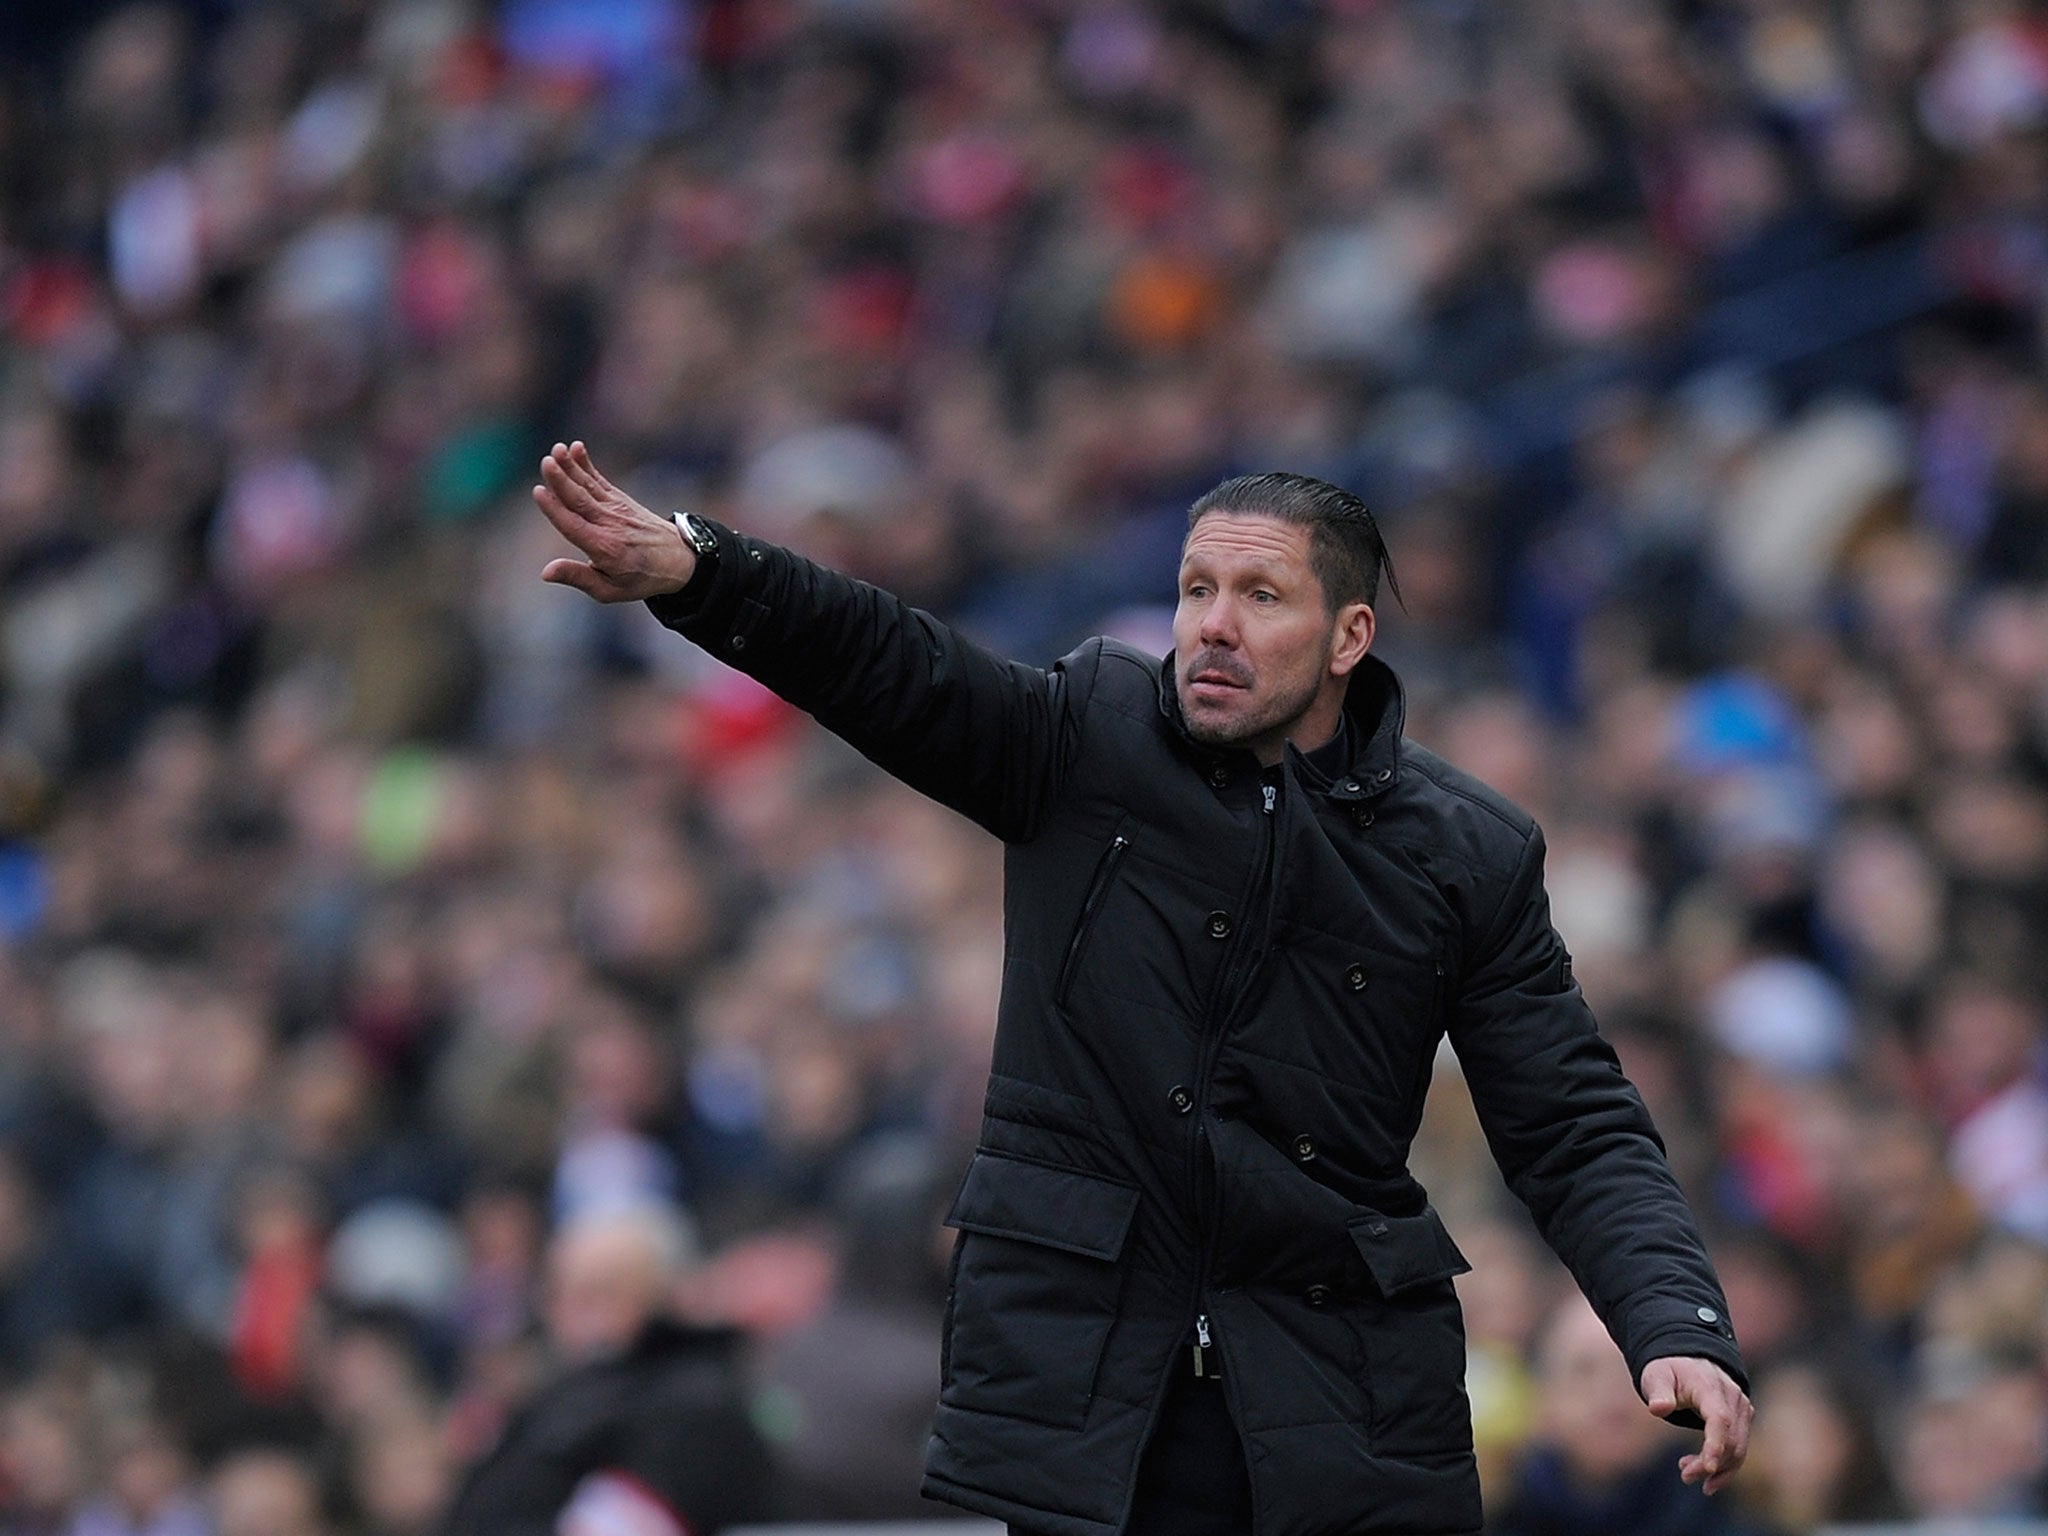 Diego Simeone is a reported managerial target for Manchester City